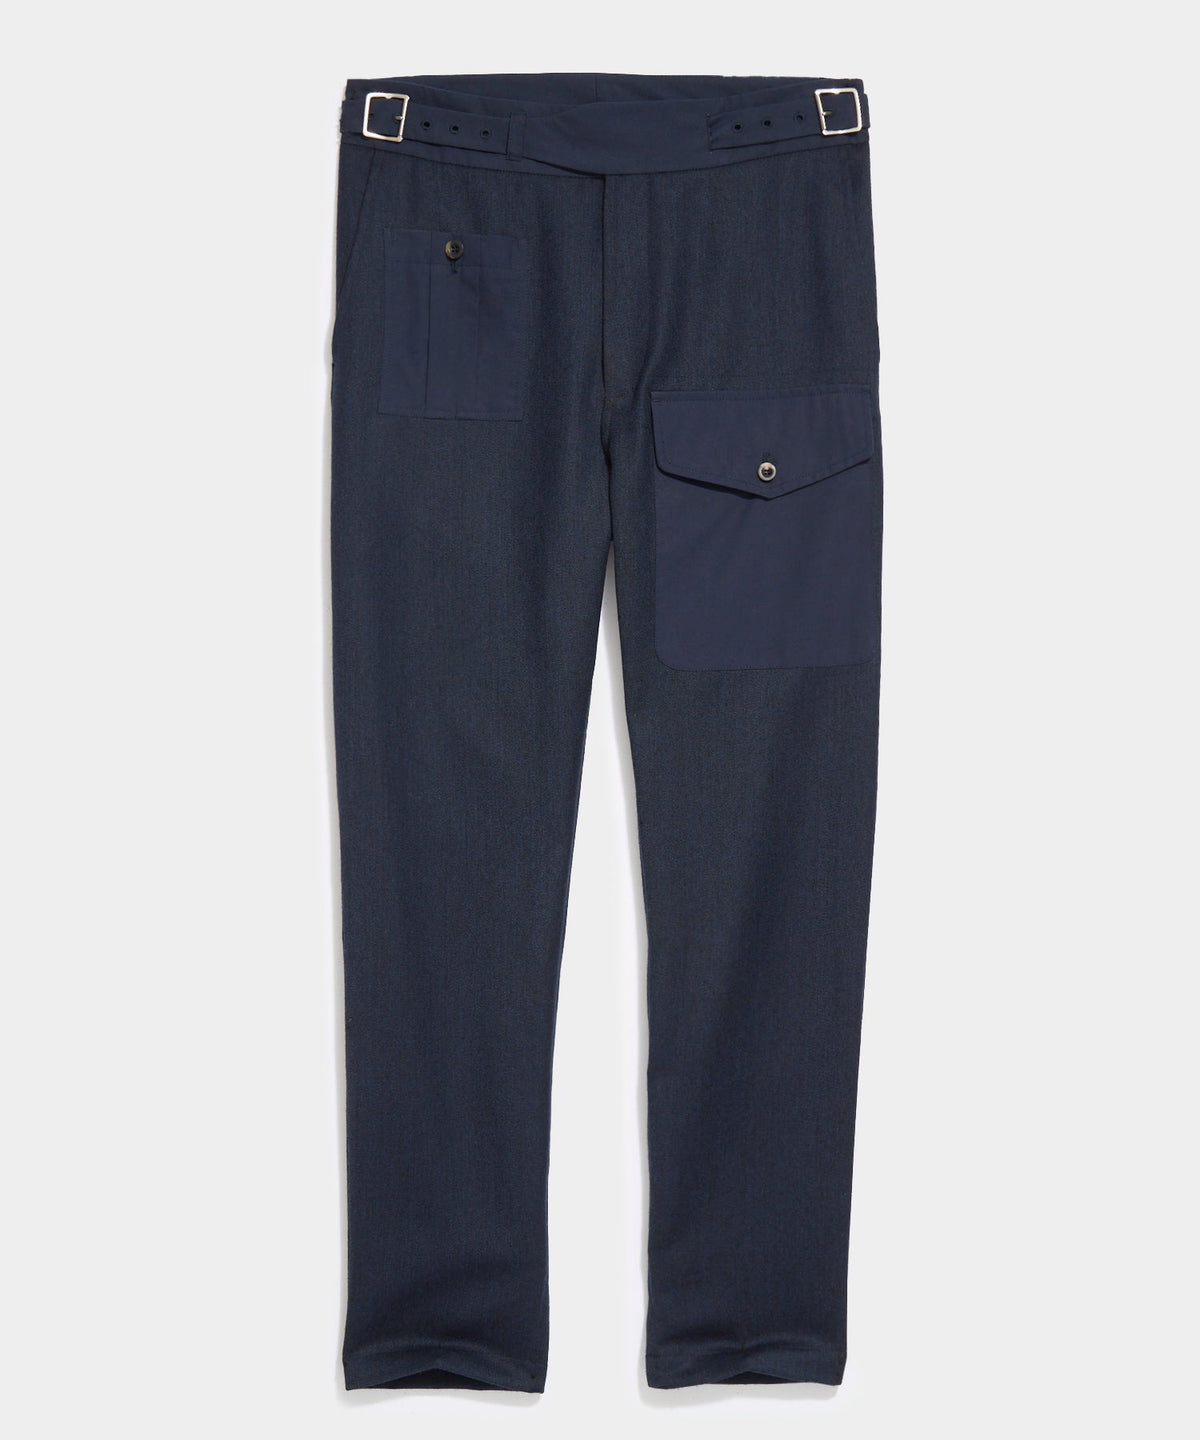 Todd Snyder x Private White Gurkha Pant in Navy